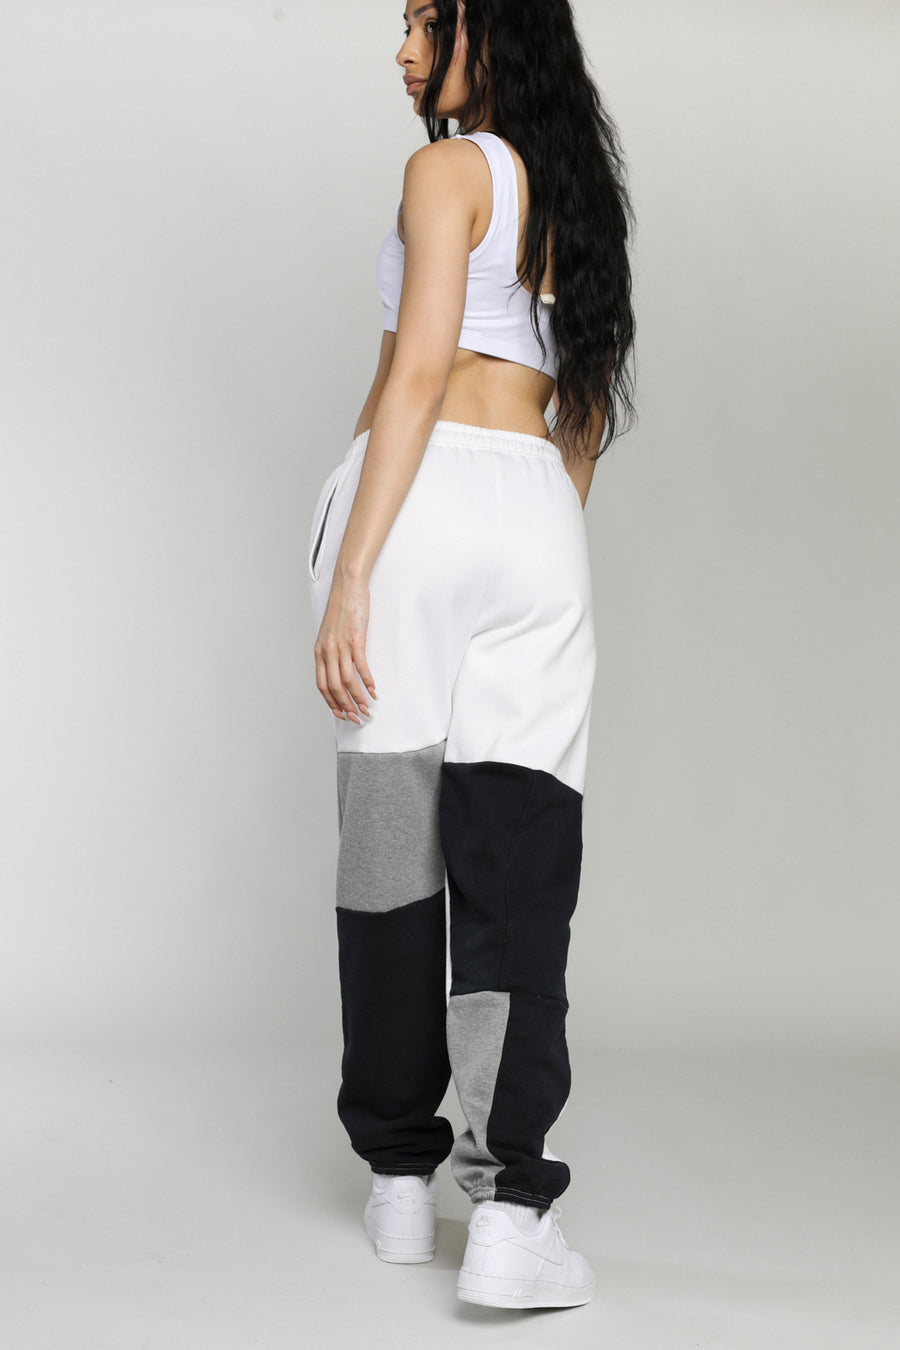 Rework Nike Patchwork Tee Shorts Set - S – Frankie Collective